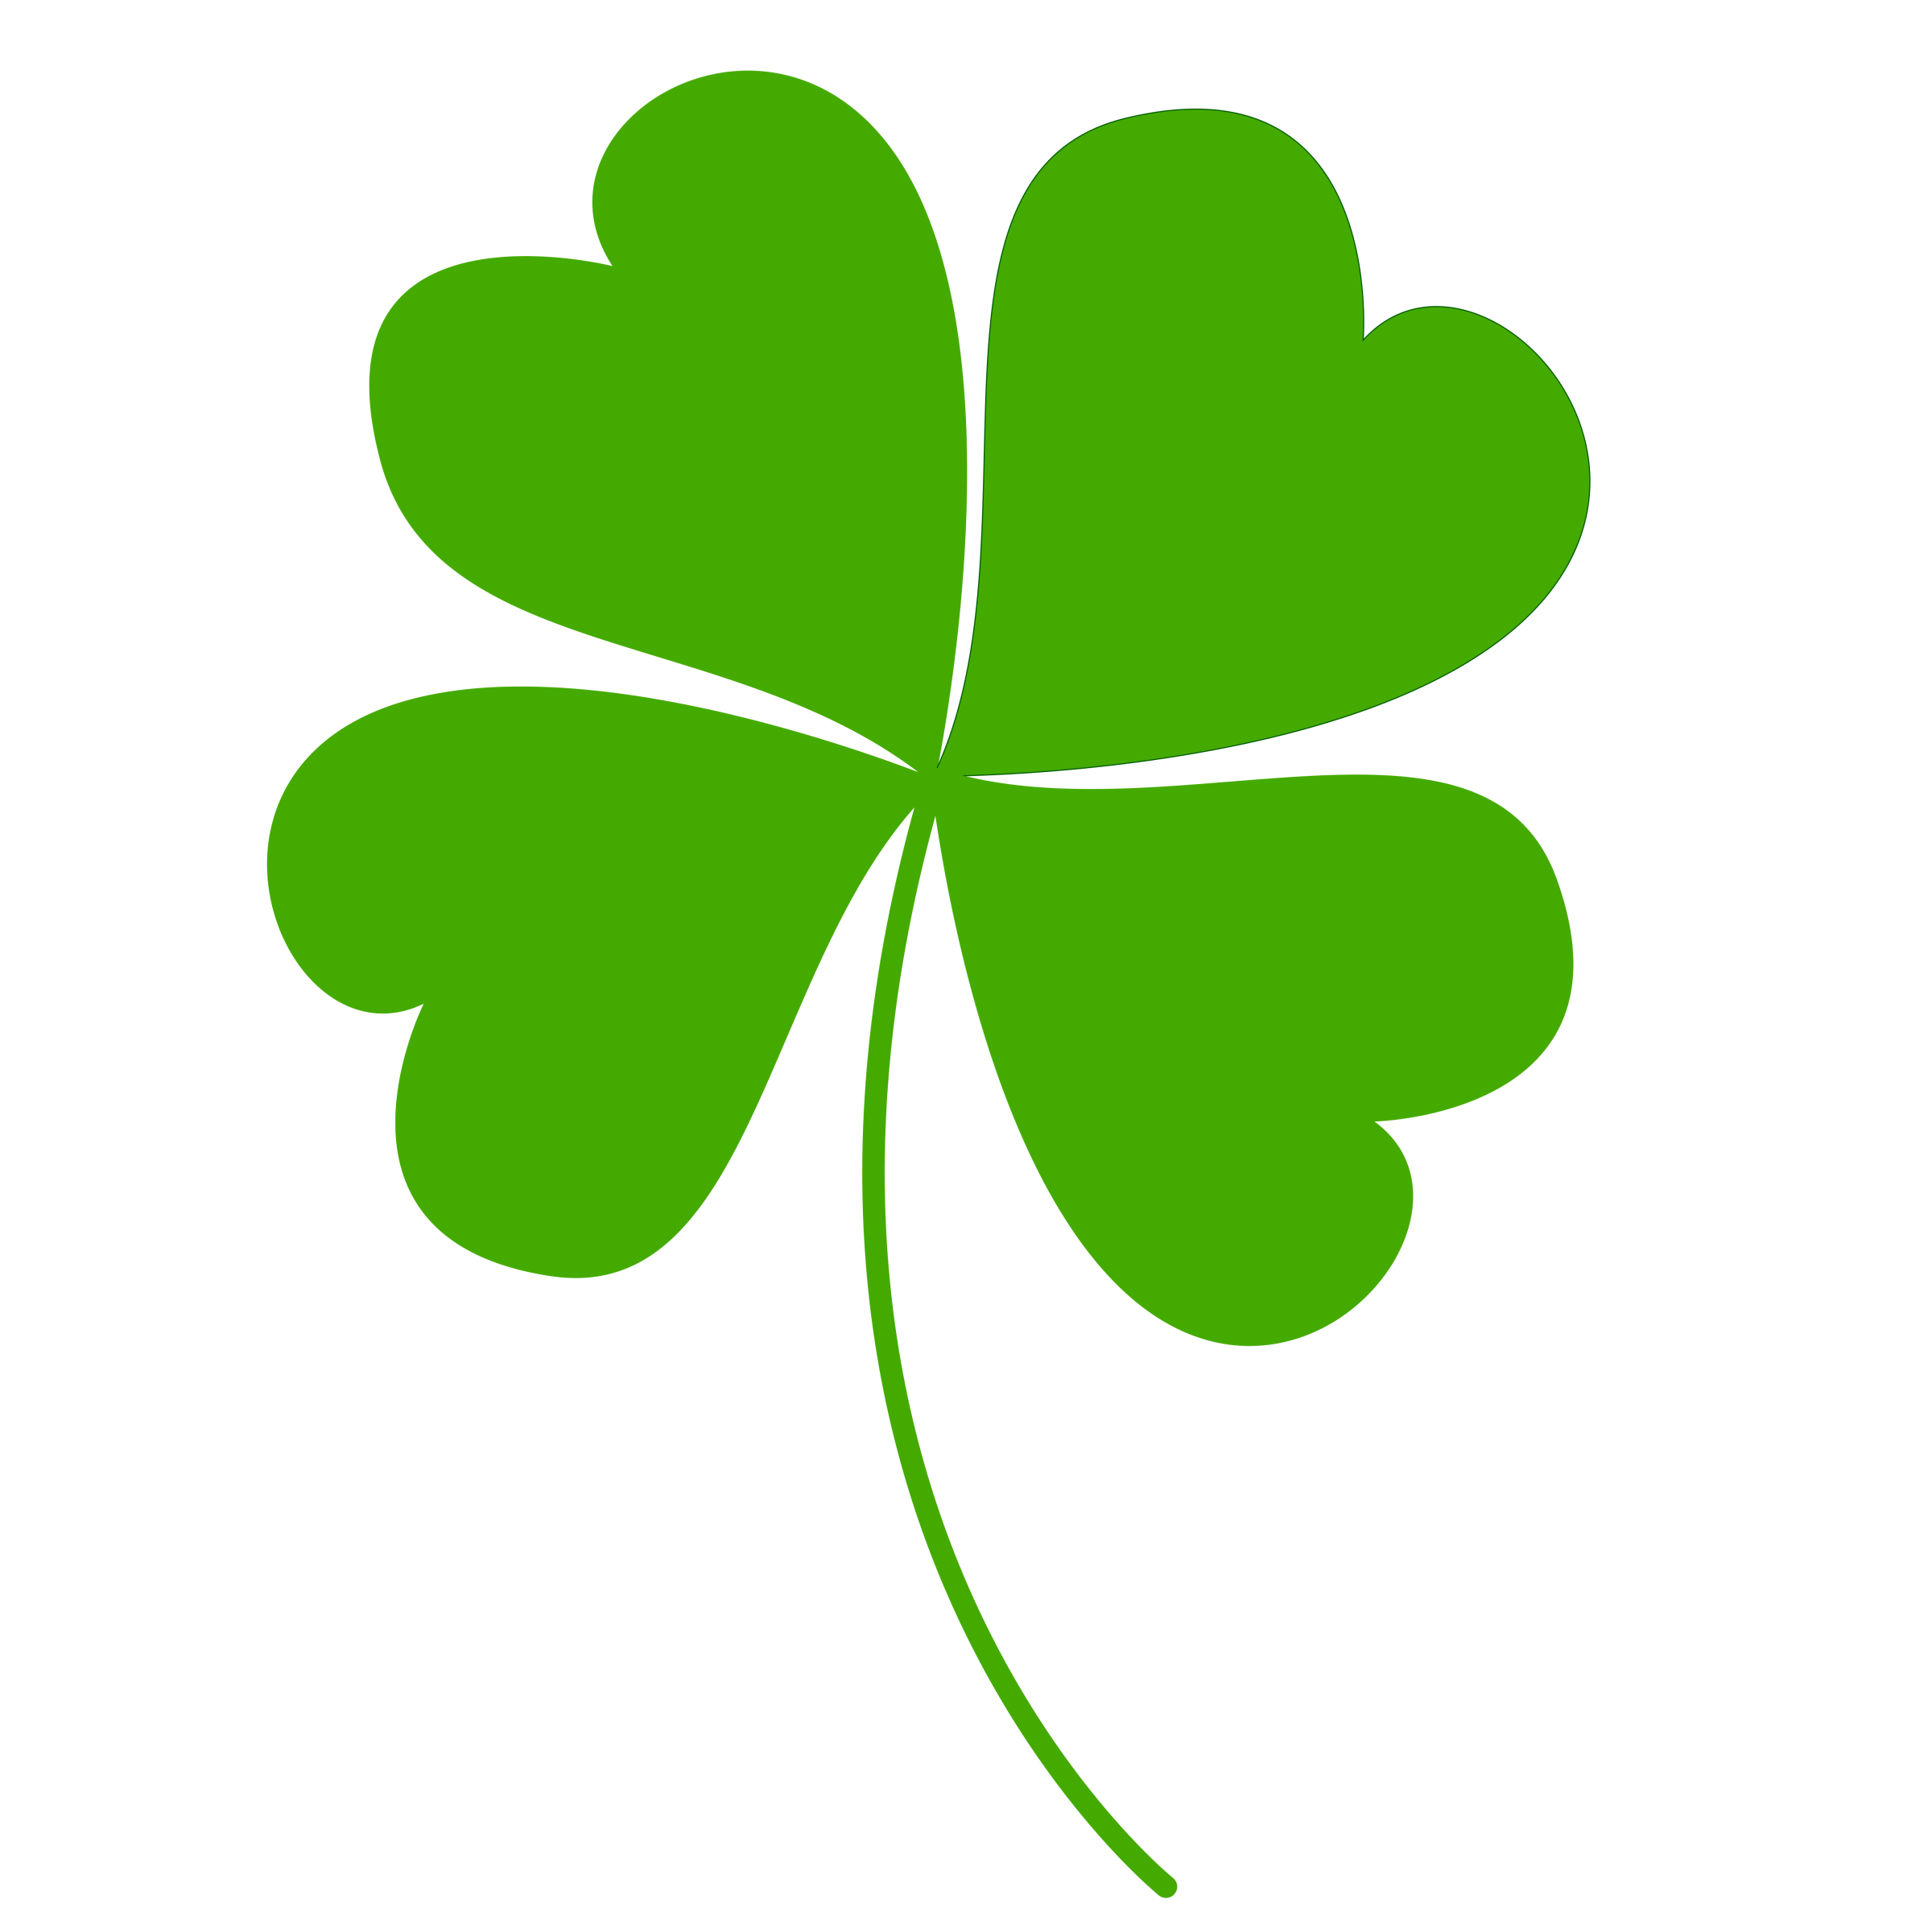 Clover PNG - 16154